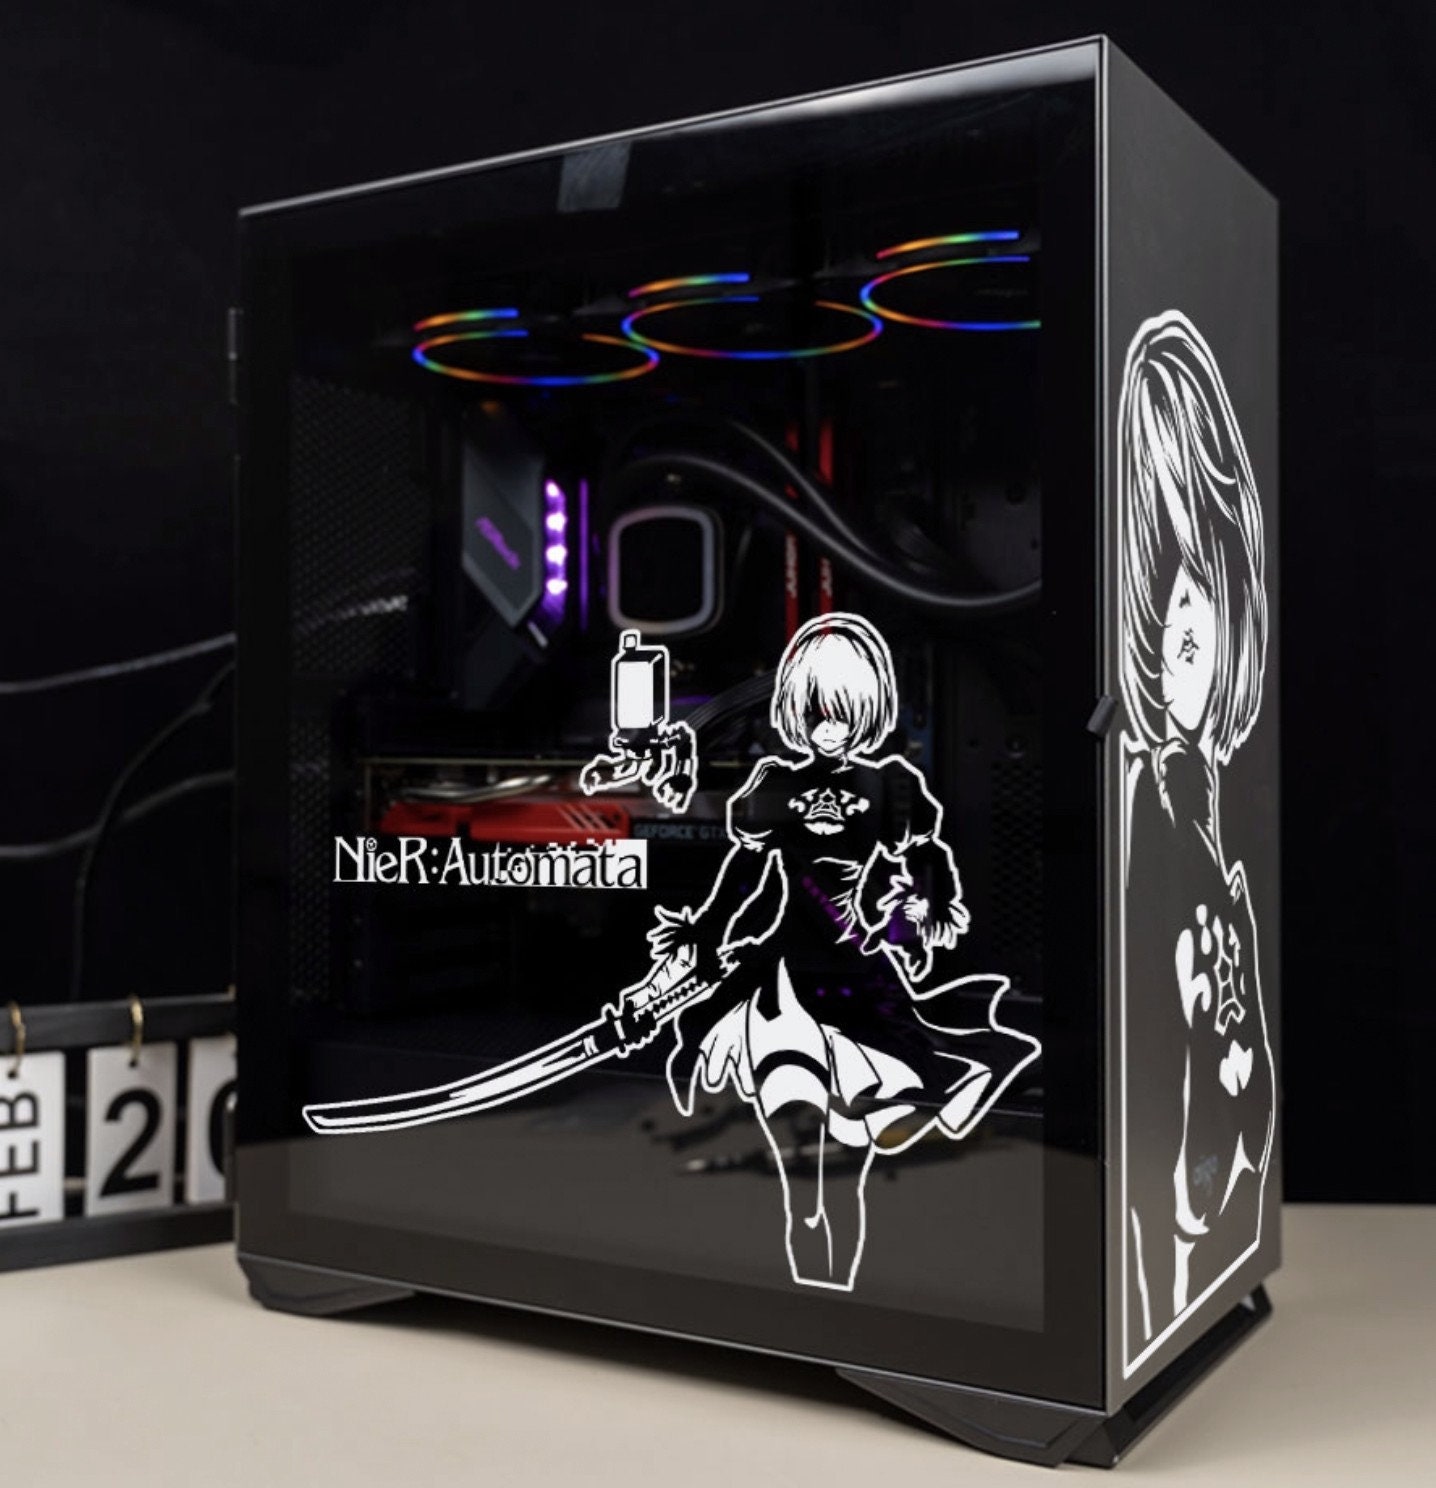 Tokyo Ghoul PC Build » builds.gg